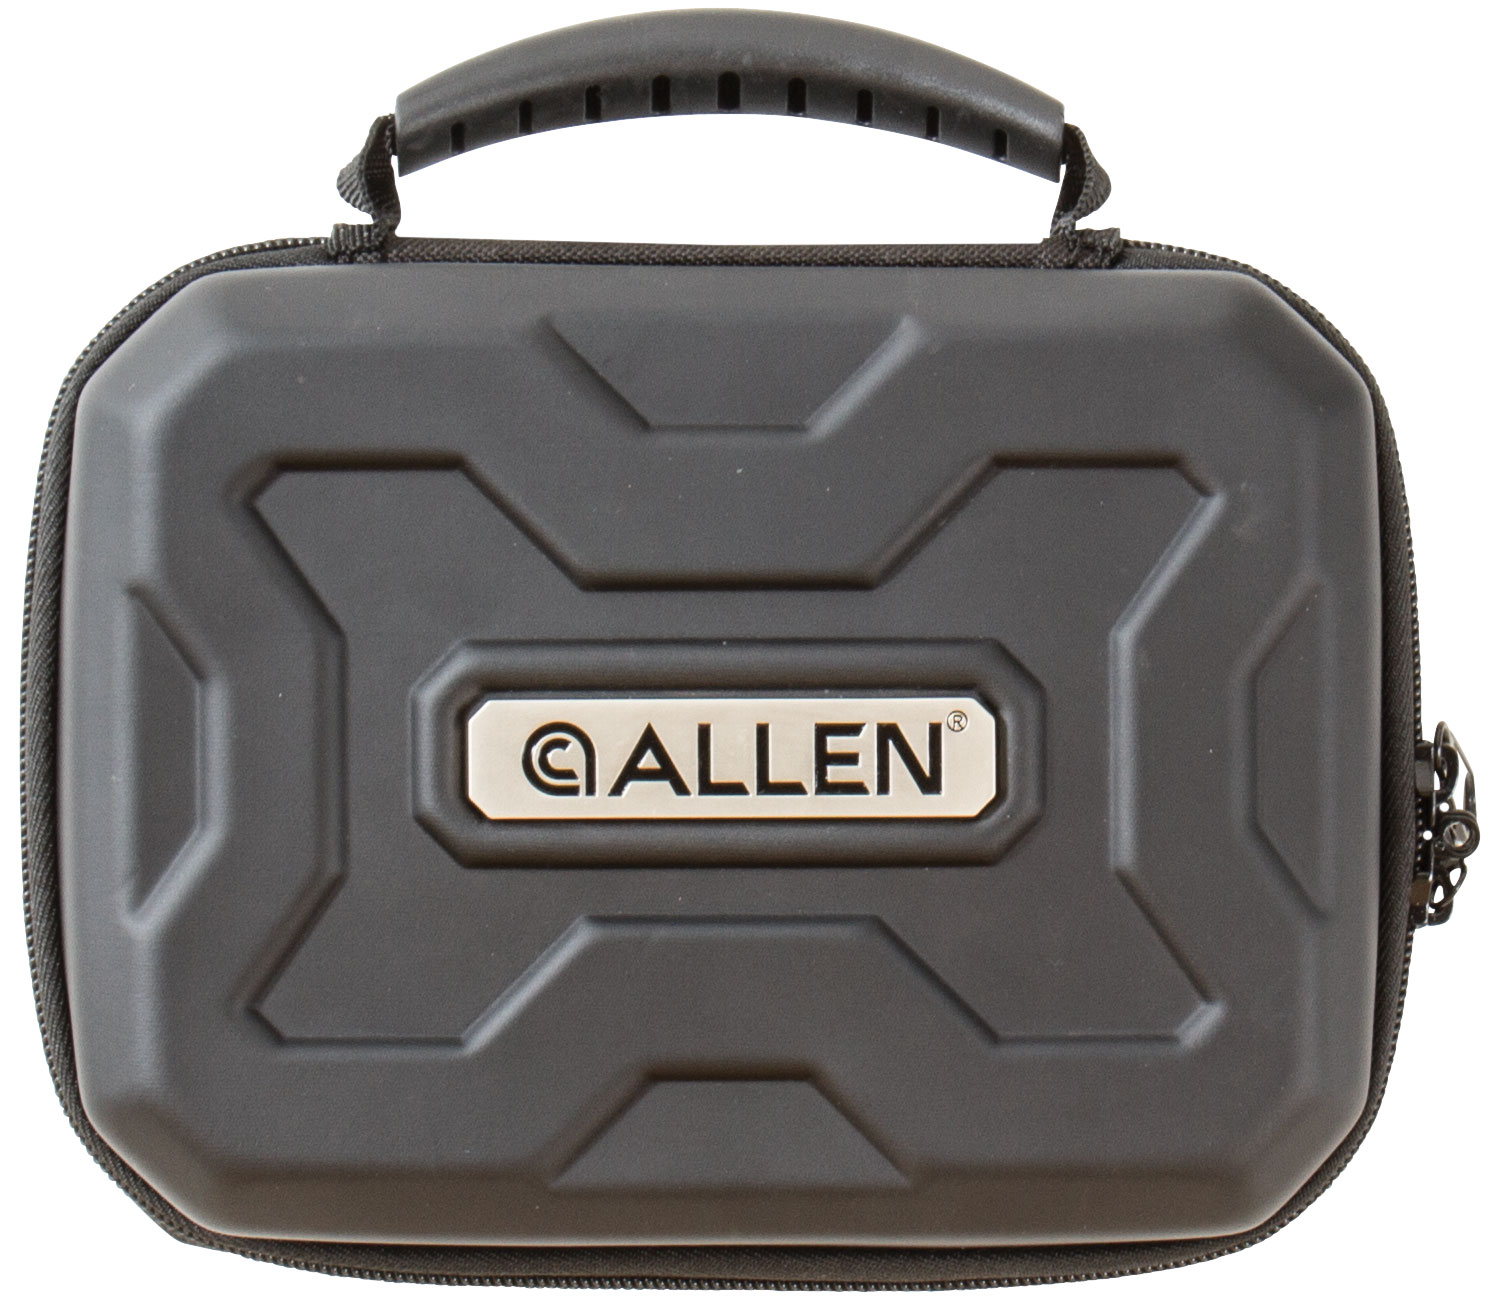 Allen 827 EXO Handgun Case made of Polymer with Black Finish, Molded Carry Handle, Egg Crate Foam & Lockable Zippers 7